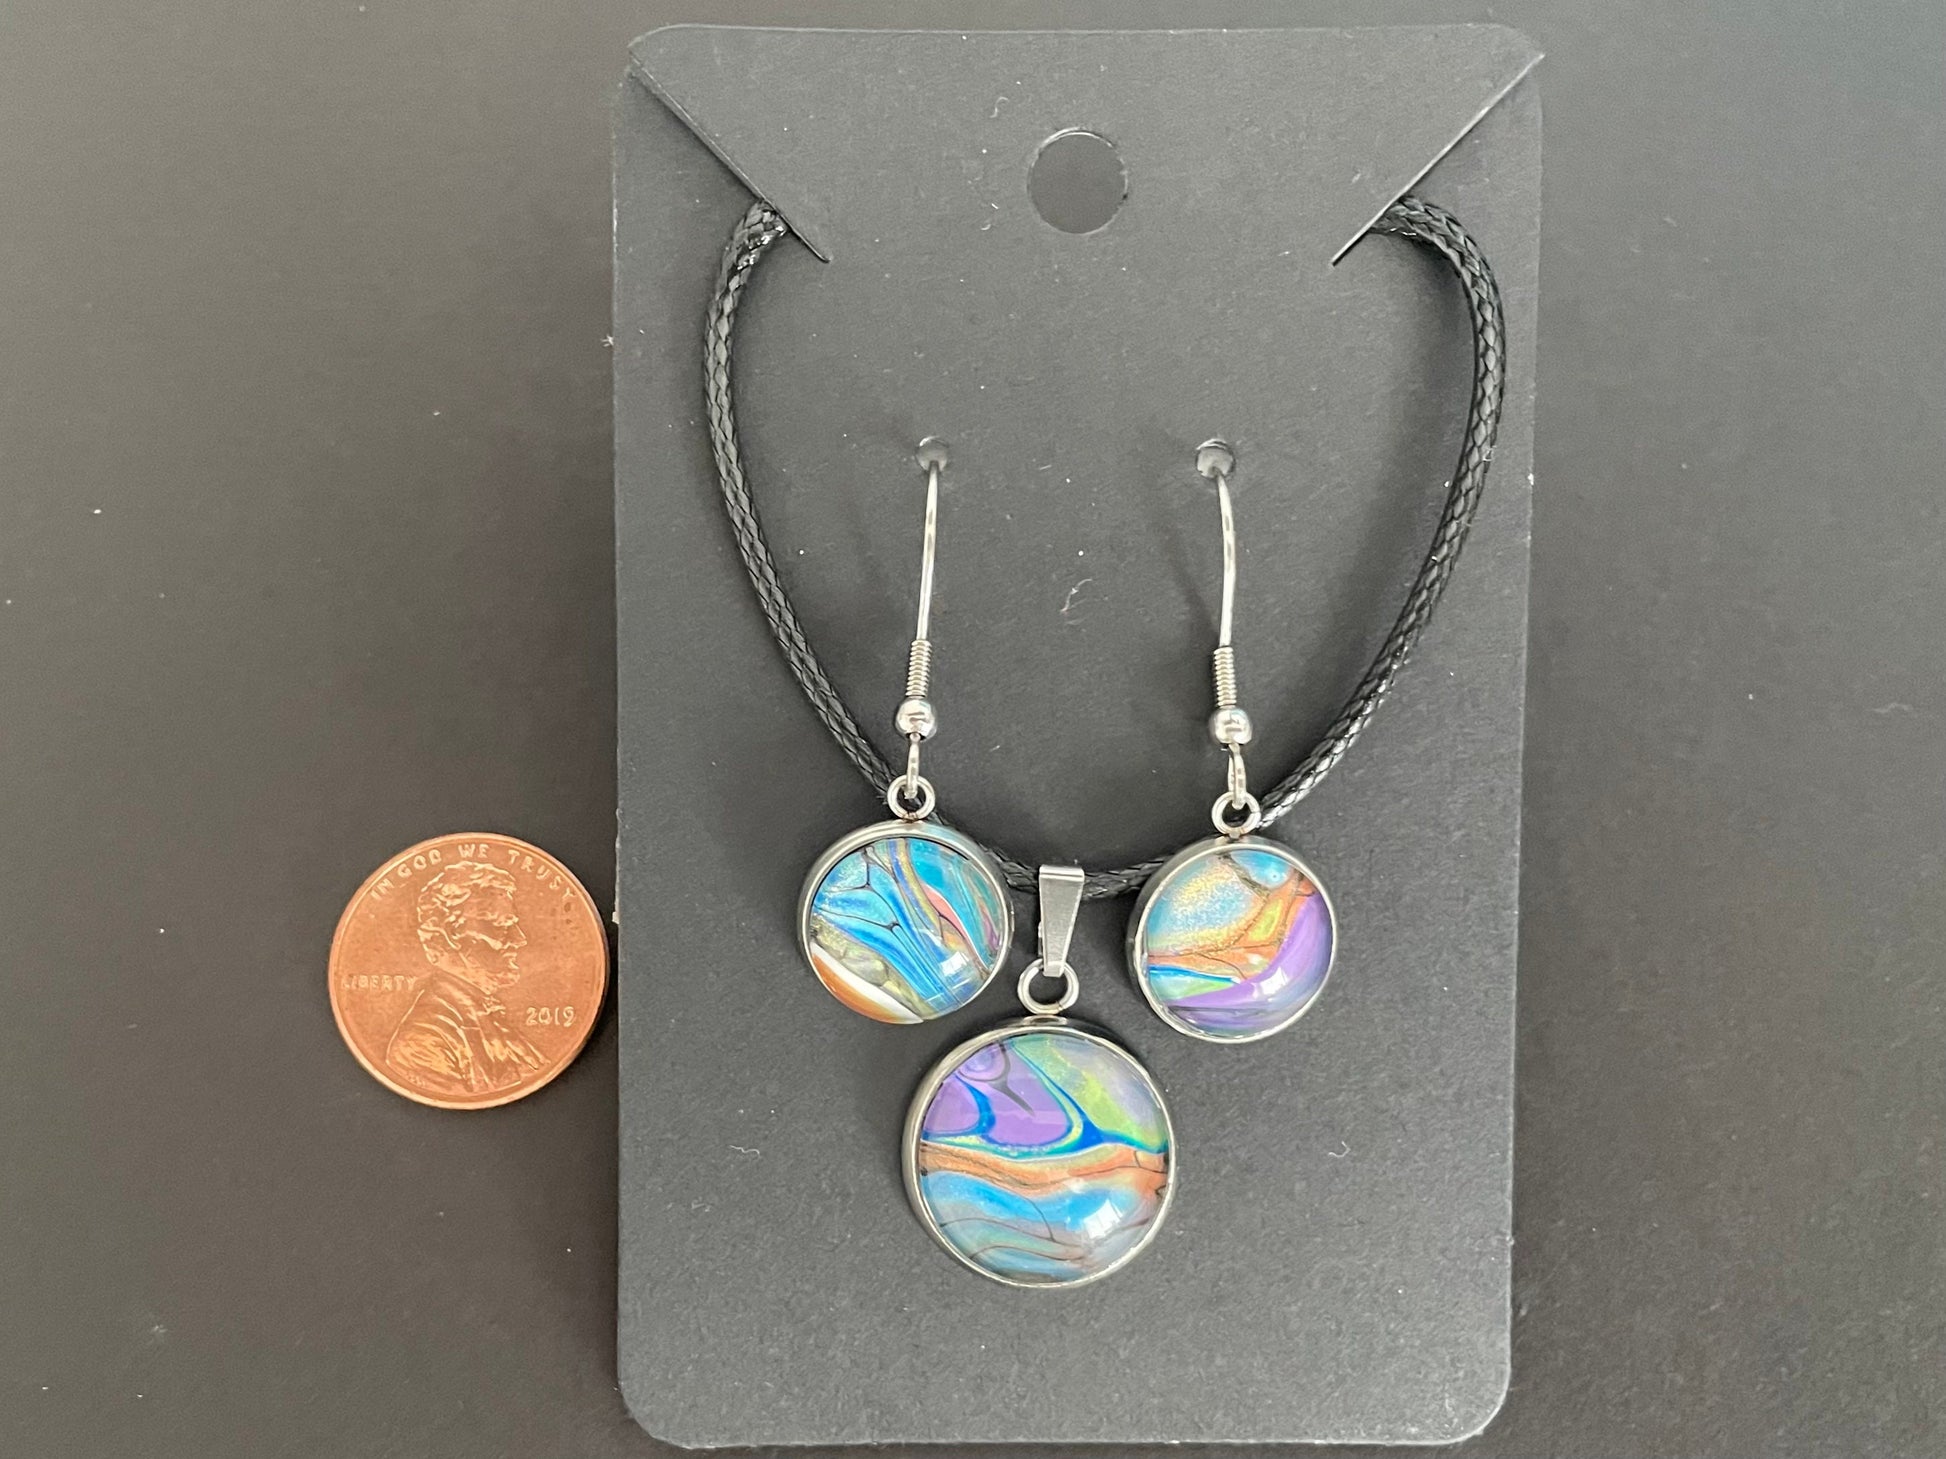 Handmade pendant necklace and dangle earrings, jewelry set in multi-colored acrylic art pour